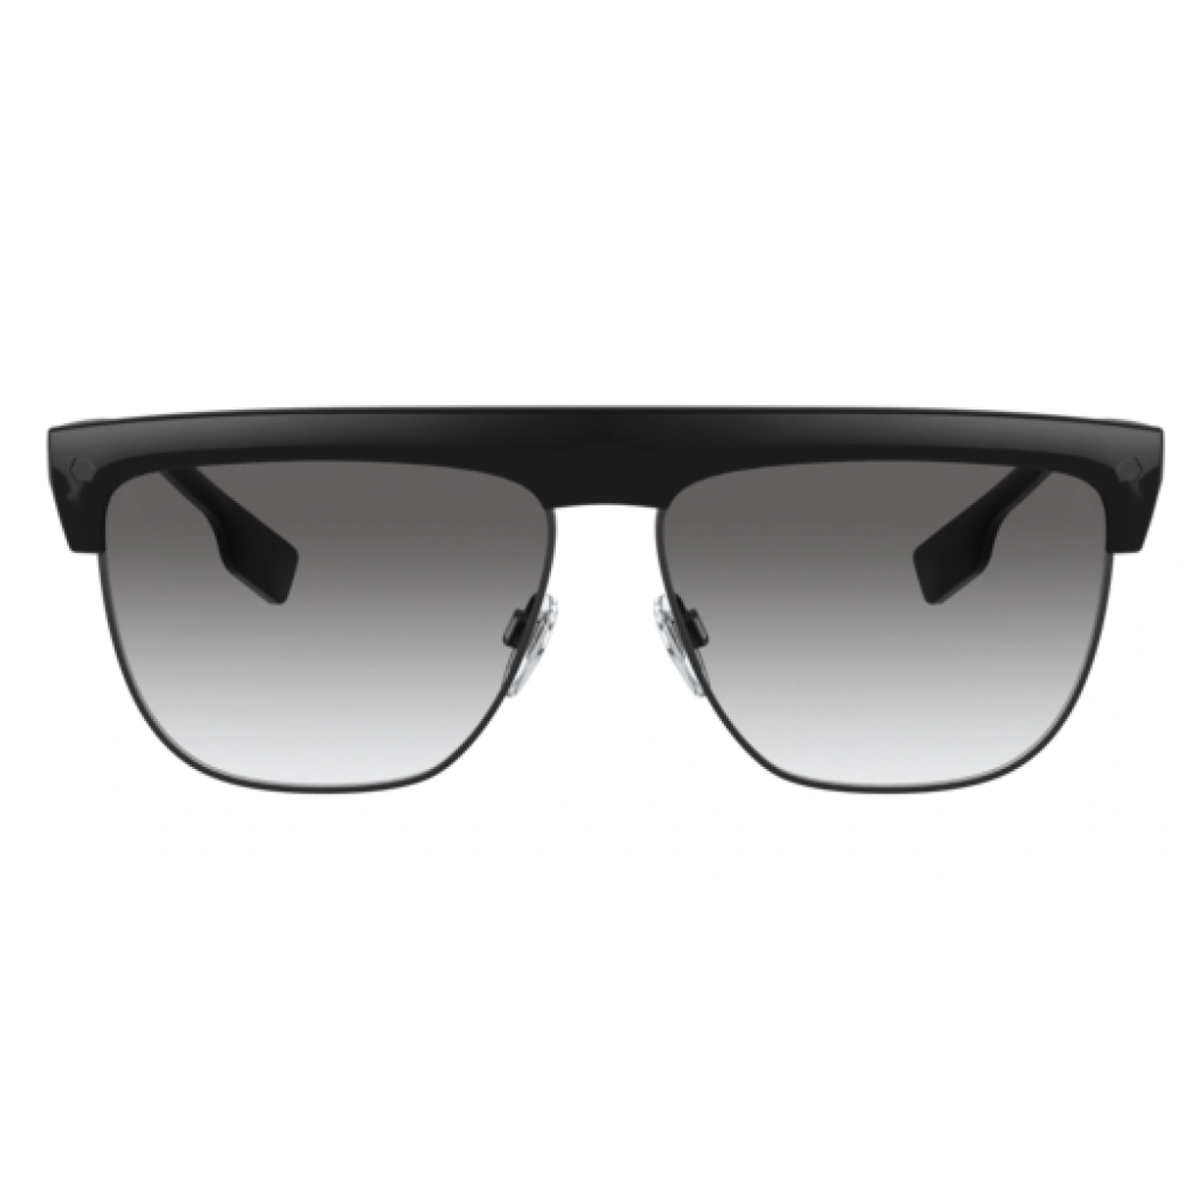 "Find the perfect pair of Burberry BE4325 300111 polarized sunglasses for men at Optorium: Stylish square-shaped shades combining fashion and functionality."